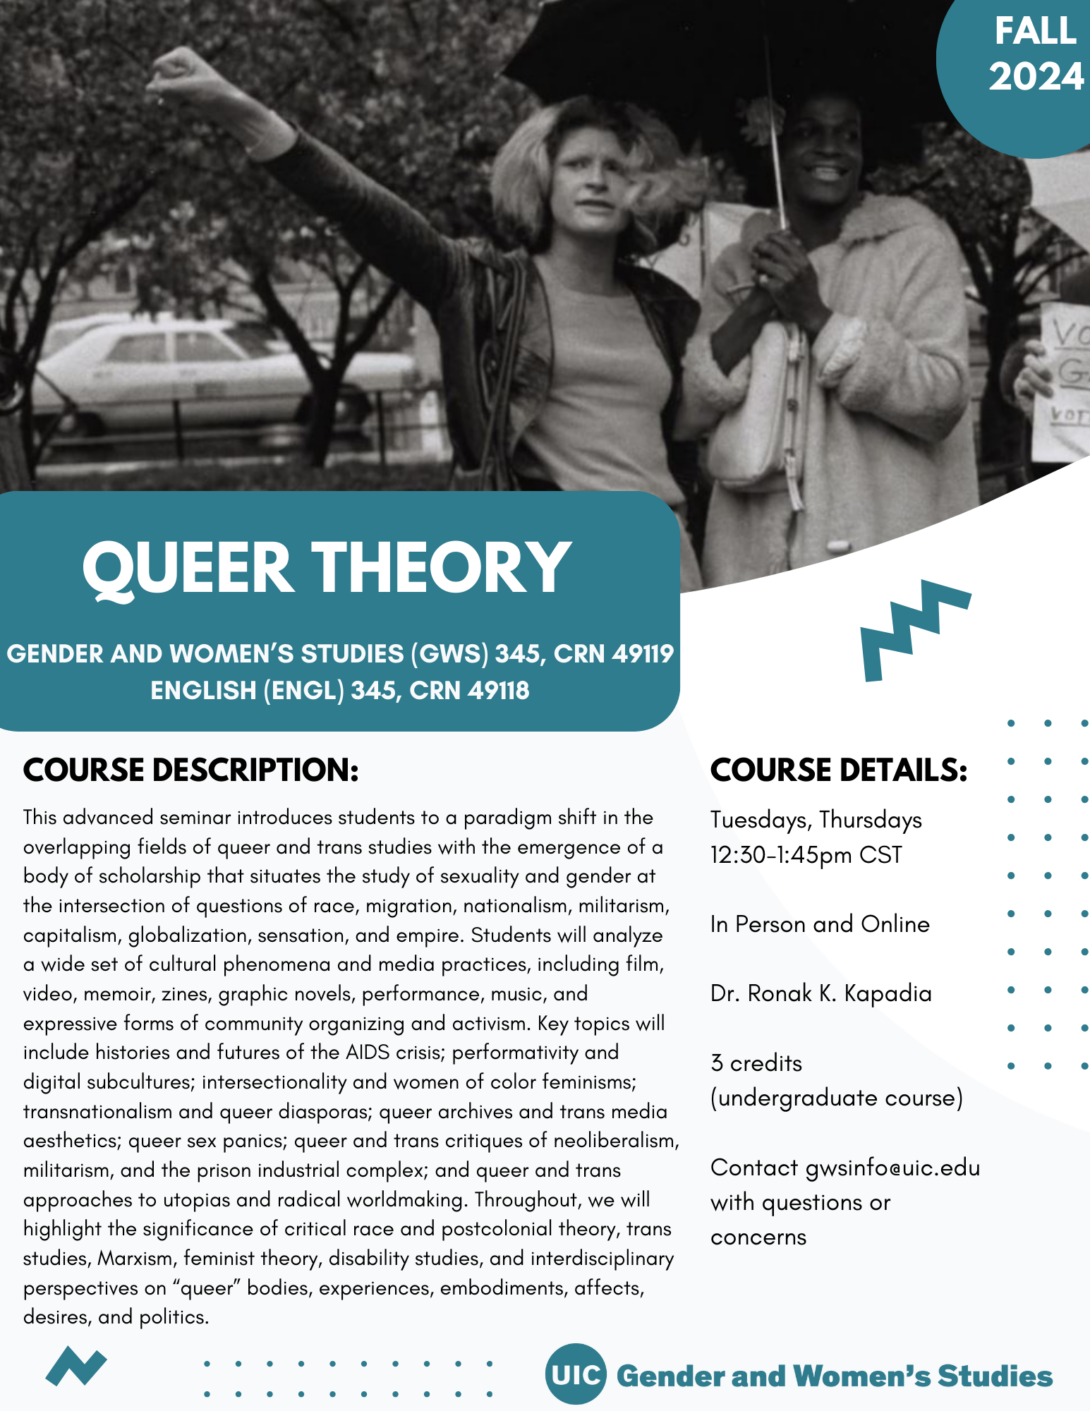 A flyer promoting the fall 2024 Queer Theory course. The top portion of the flyer includes a black and white photo of Sylvia Rivera and Marsha P. Johnson standing side-by-side. Rivera is holding up a fist with their right hand. Johnson is holding an umbrella overhead. In the top right corner is a teal circle with Fall 2024 inside it in white text. The bottom left portion of the photo is covered with a teal block that includes the course title in white text. Below that is the course description and course details in black text on a white background. A teal GWS logo appears in the bottom right of the flyer. Parallel lines of teal dots and teal geometric designs decorate the page.